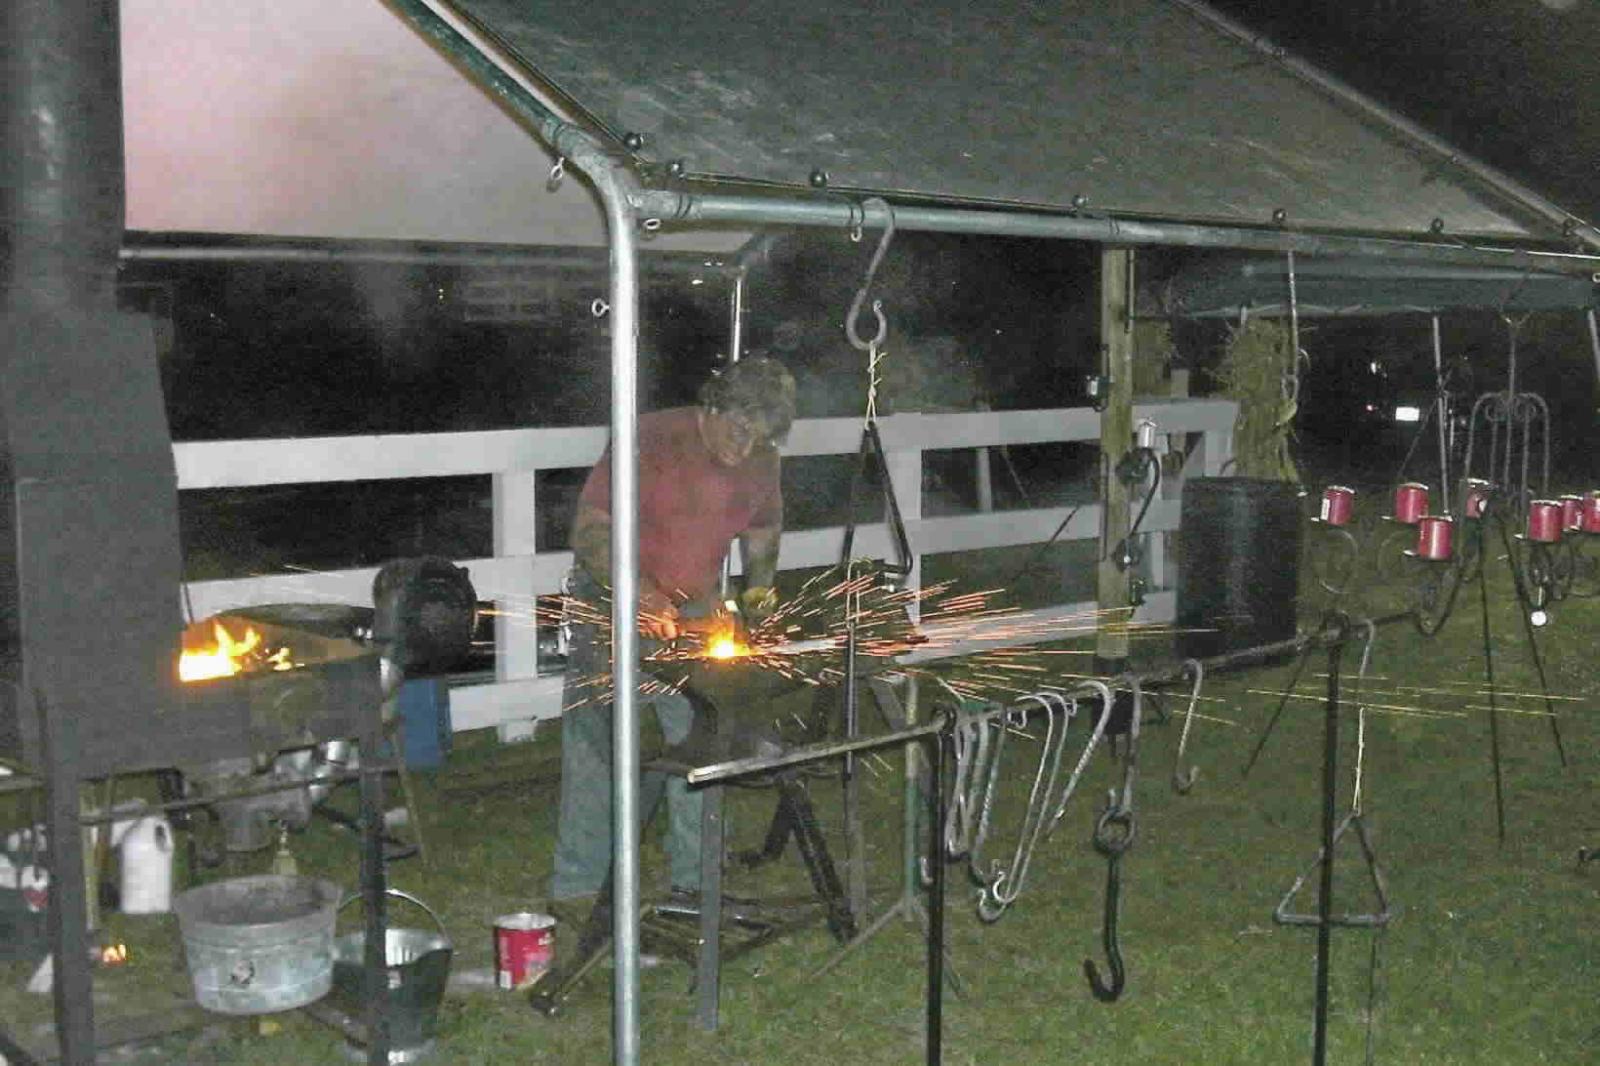 Forge welding at a demo.....night time